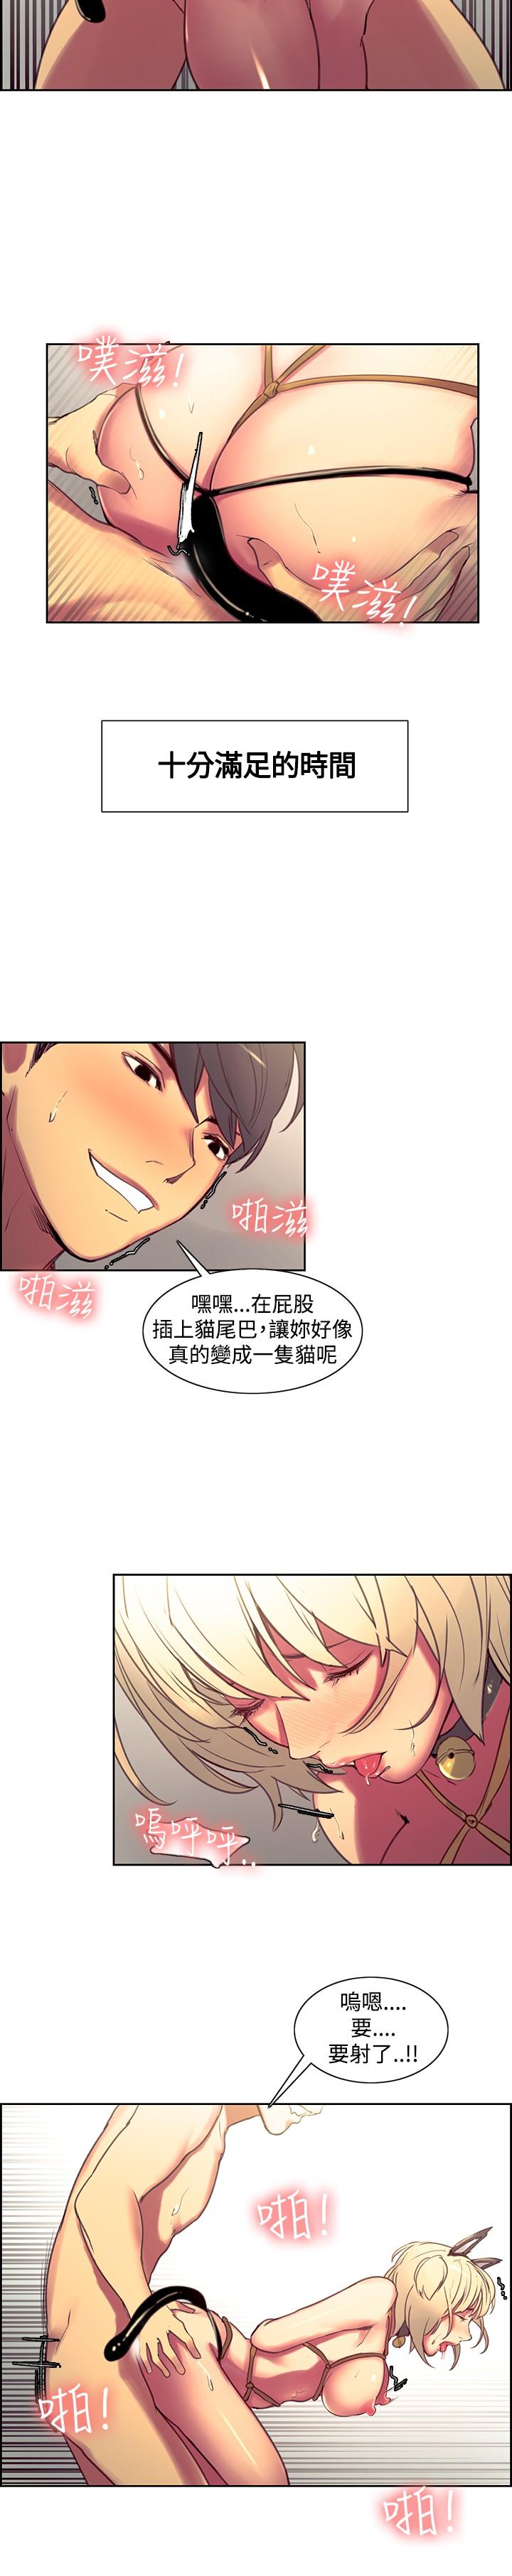 [Serious] Domesticate the Housekeeper 调教家政妇 Ch.29~44END [Chinese]中文 135